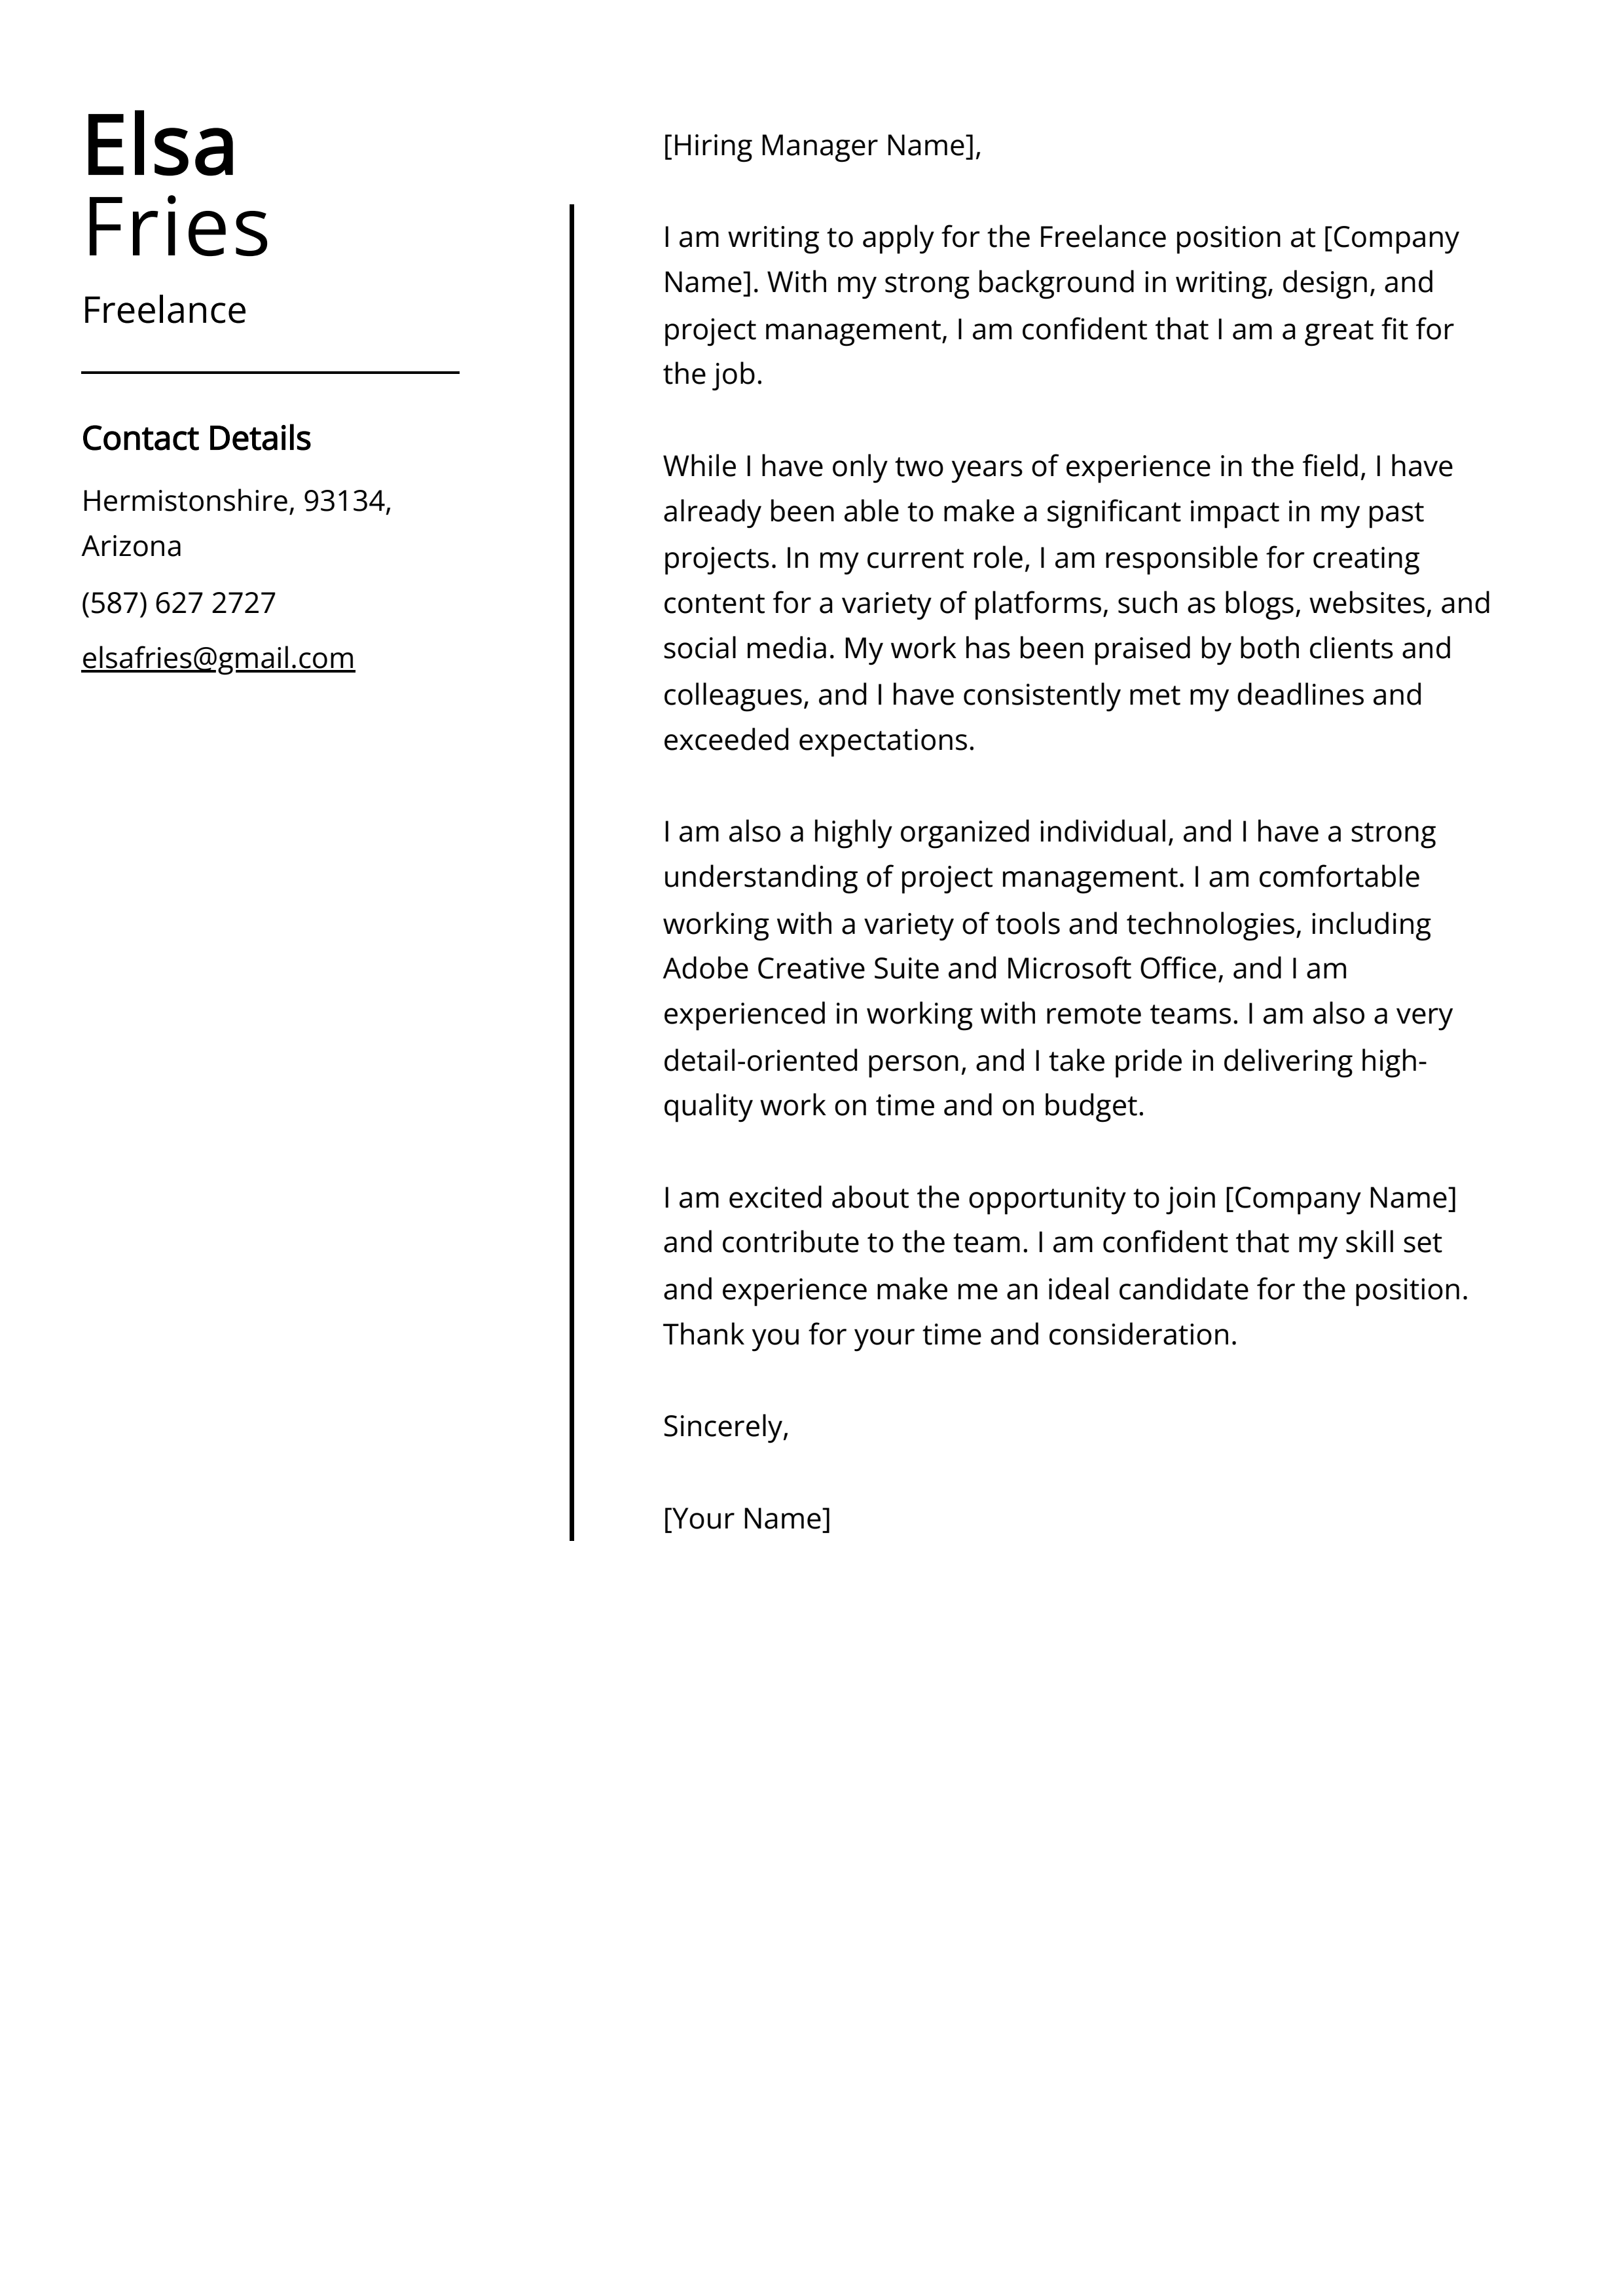 Freelance Cover Letter Example